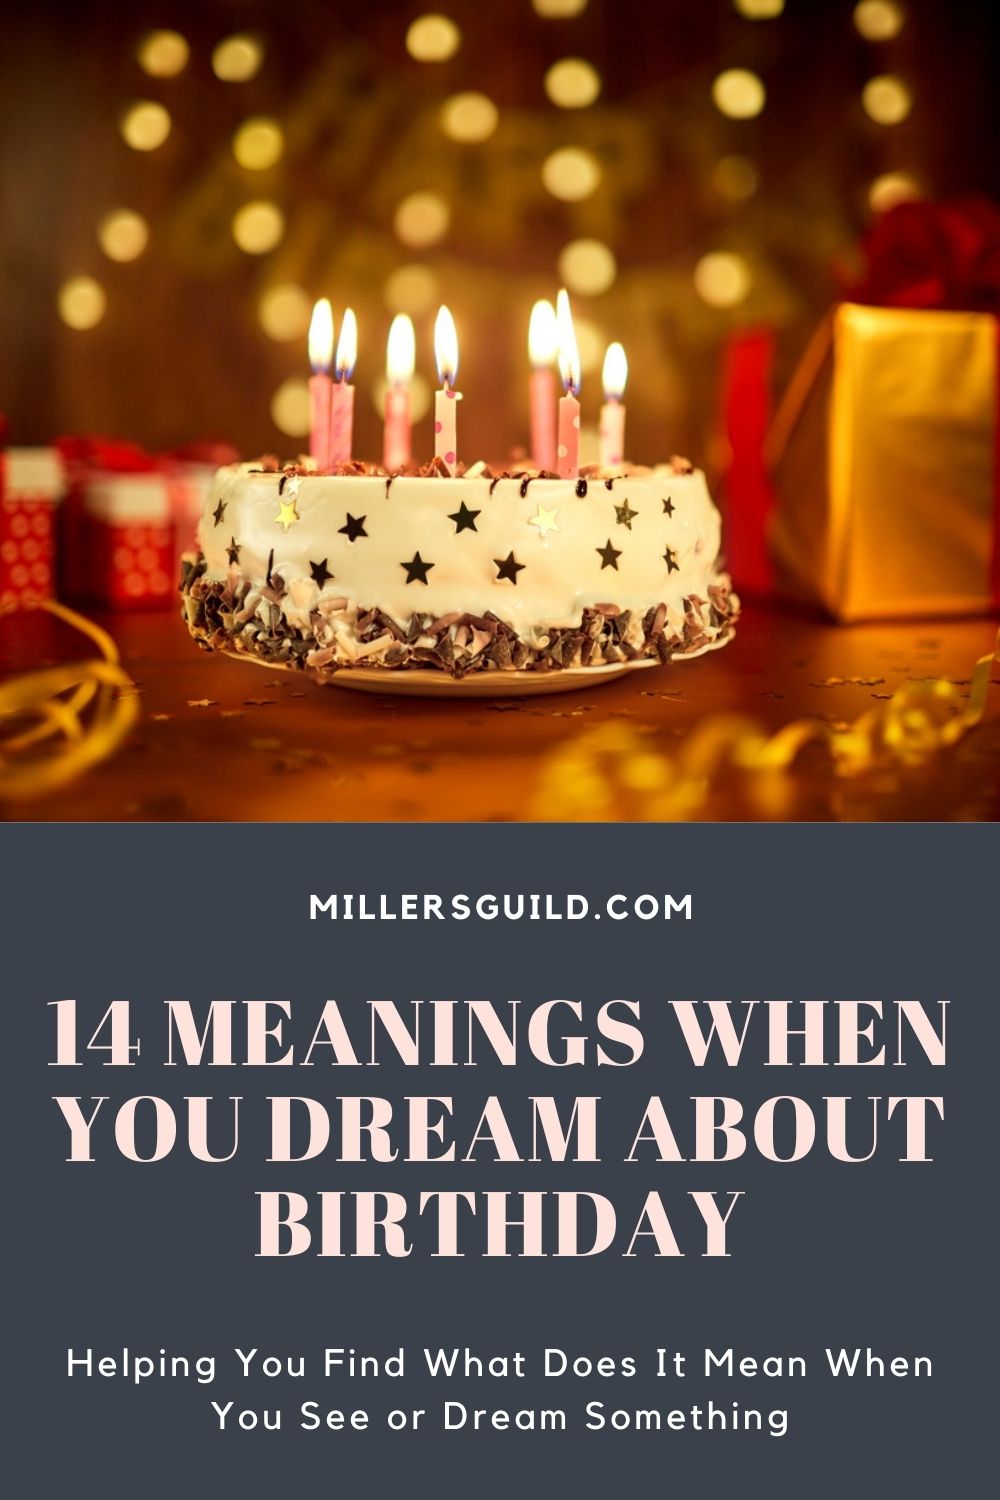 14 Meanings When You Dream About Birthday 2